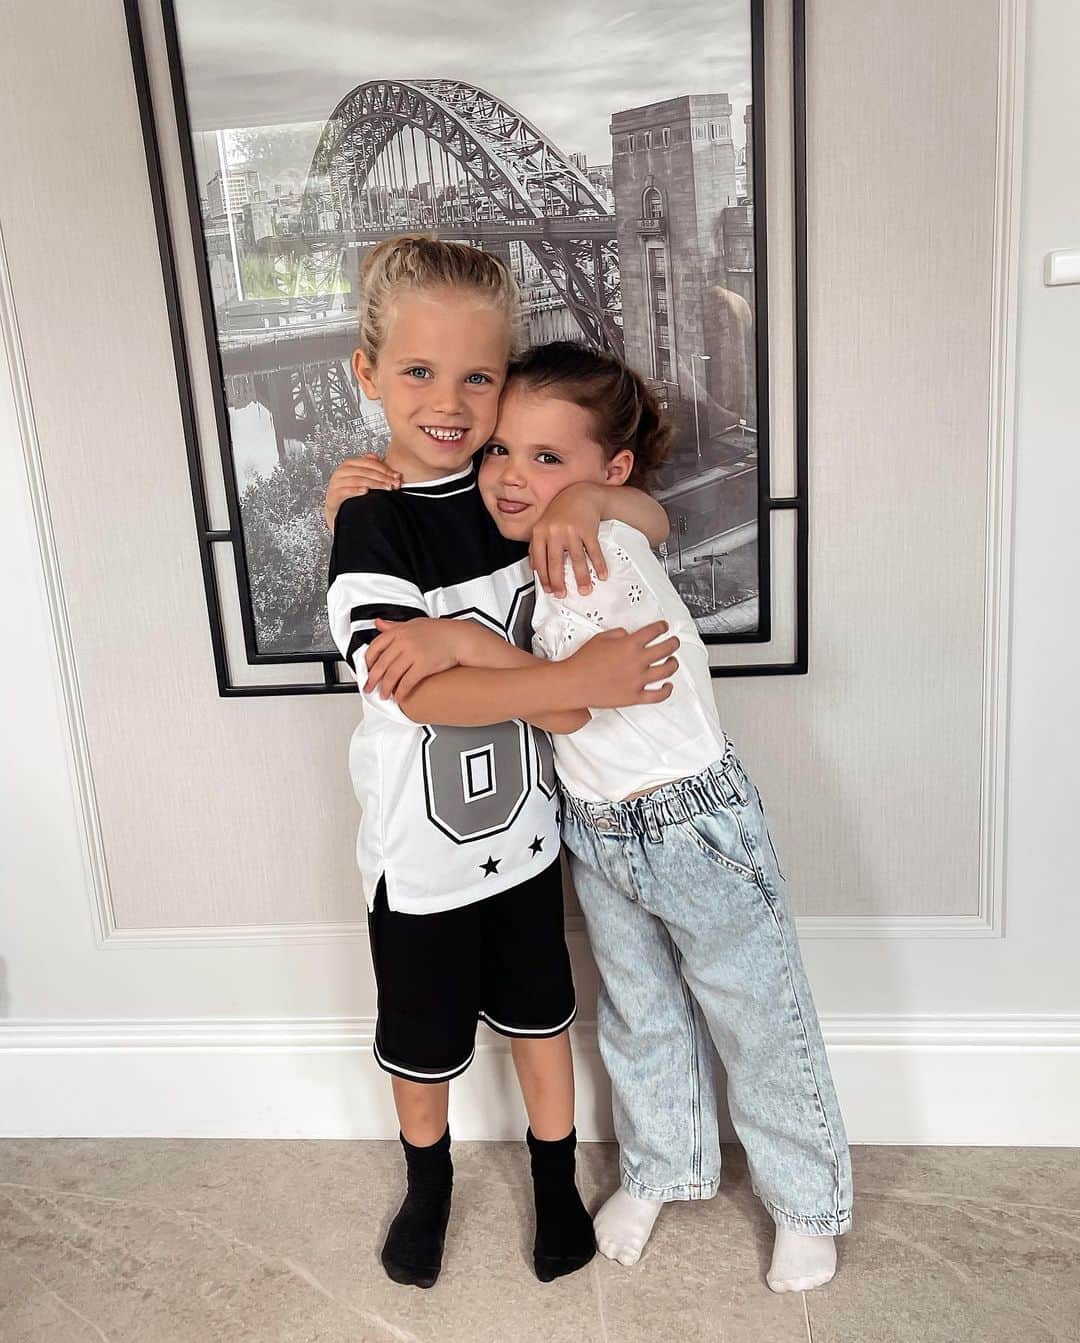 GazGShoreのインスタグラム：「An unbreakable bond 🤍 my babies growing up way too fast! Photo 3, is it me or does Chester look like he’s shot up and going into year 4 not 1?! 😩」